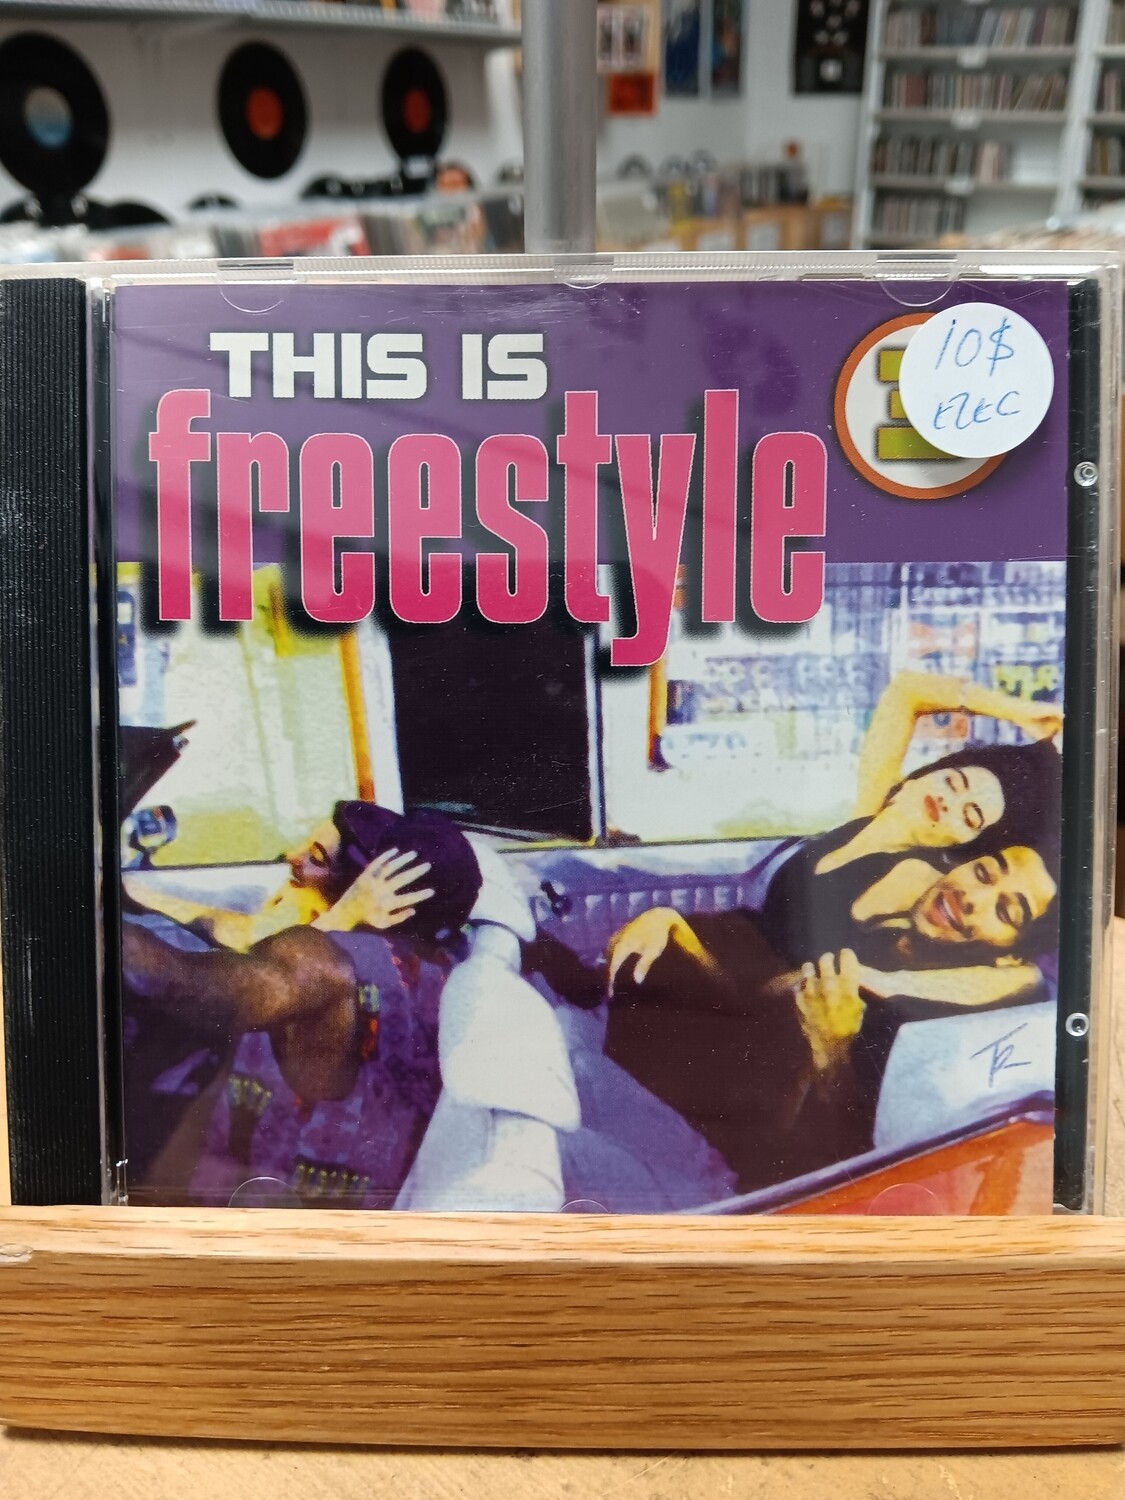 VARIOUS - This is freestyle 3 (CD)